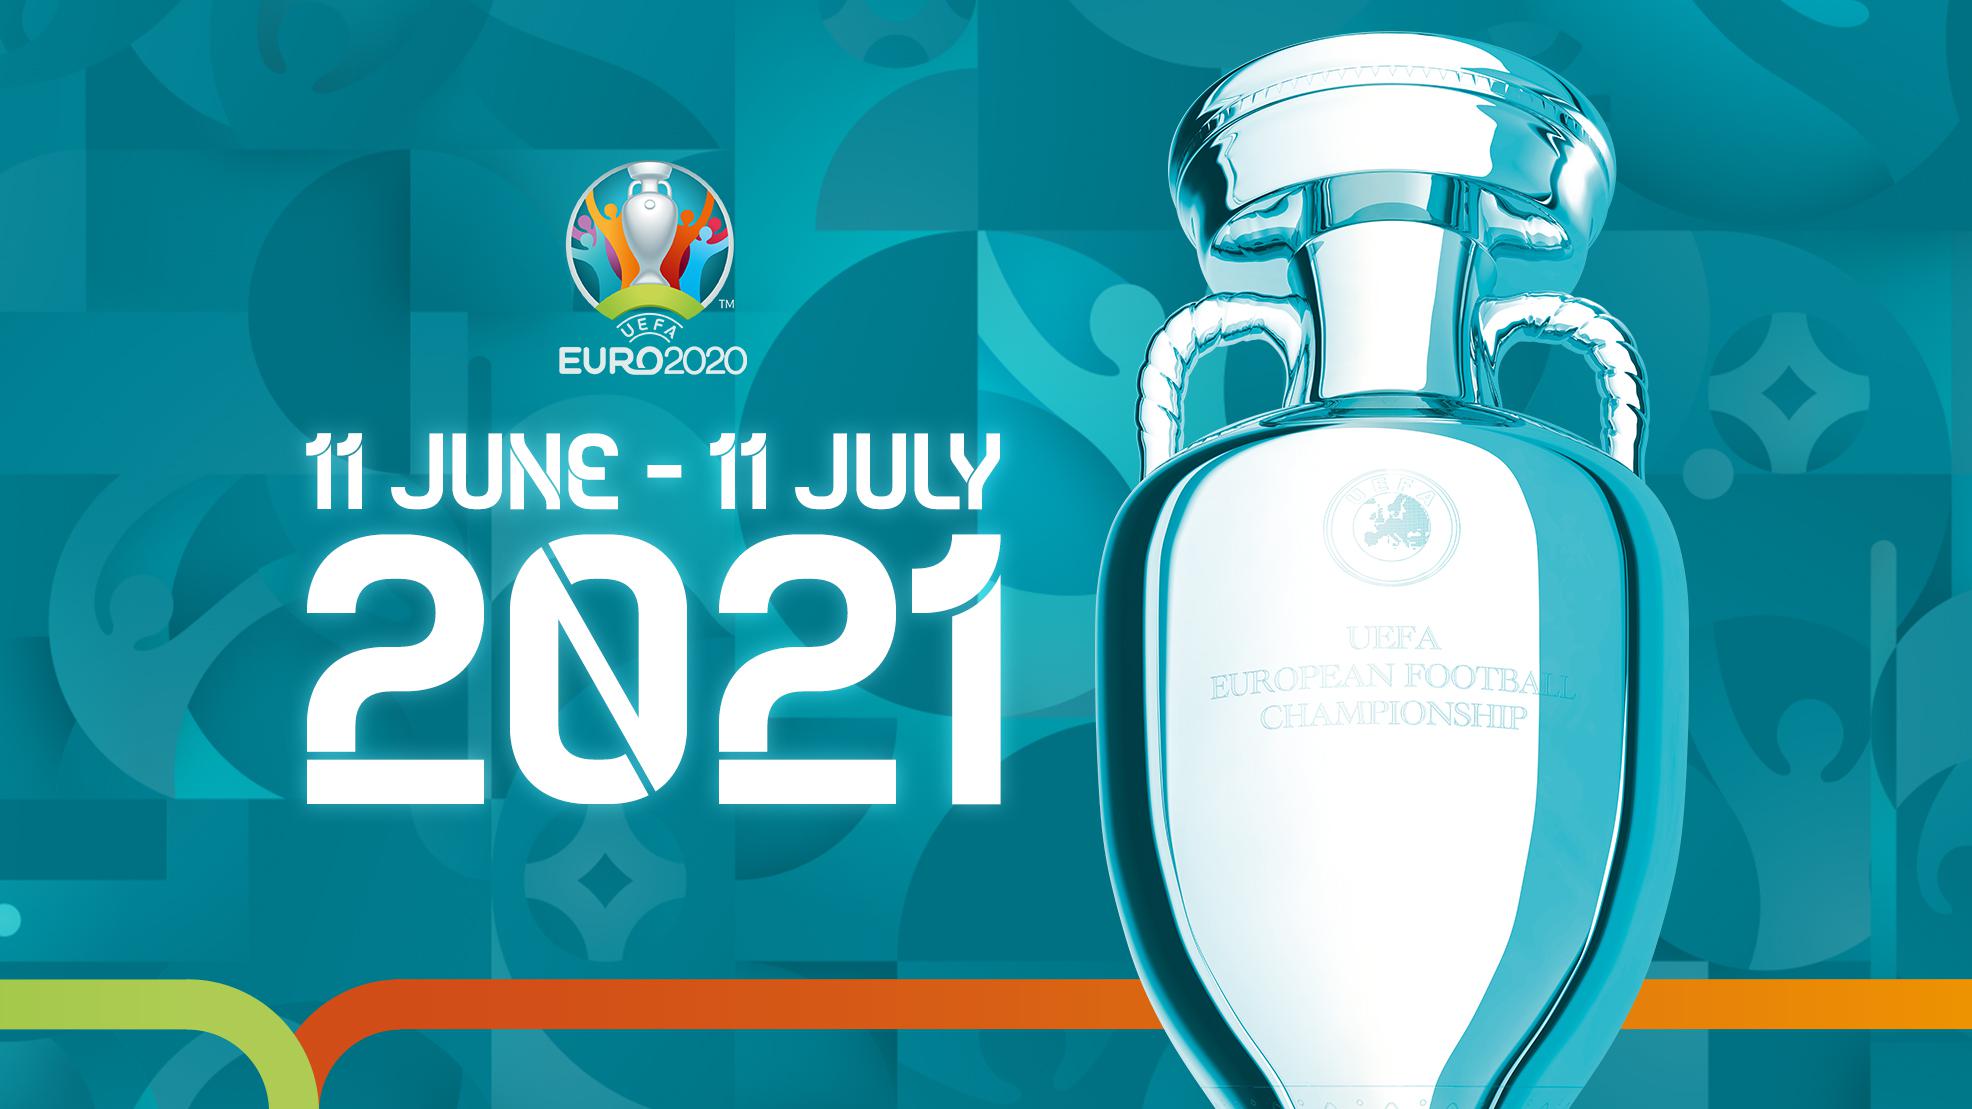 image of starting date of Euro 2020 starts on 11 June 2021 till 11 July 2021